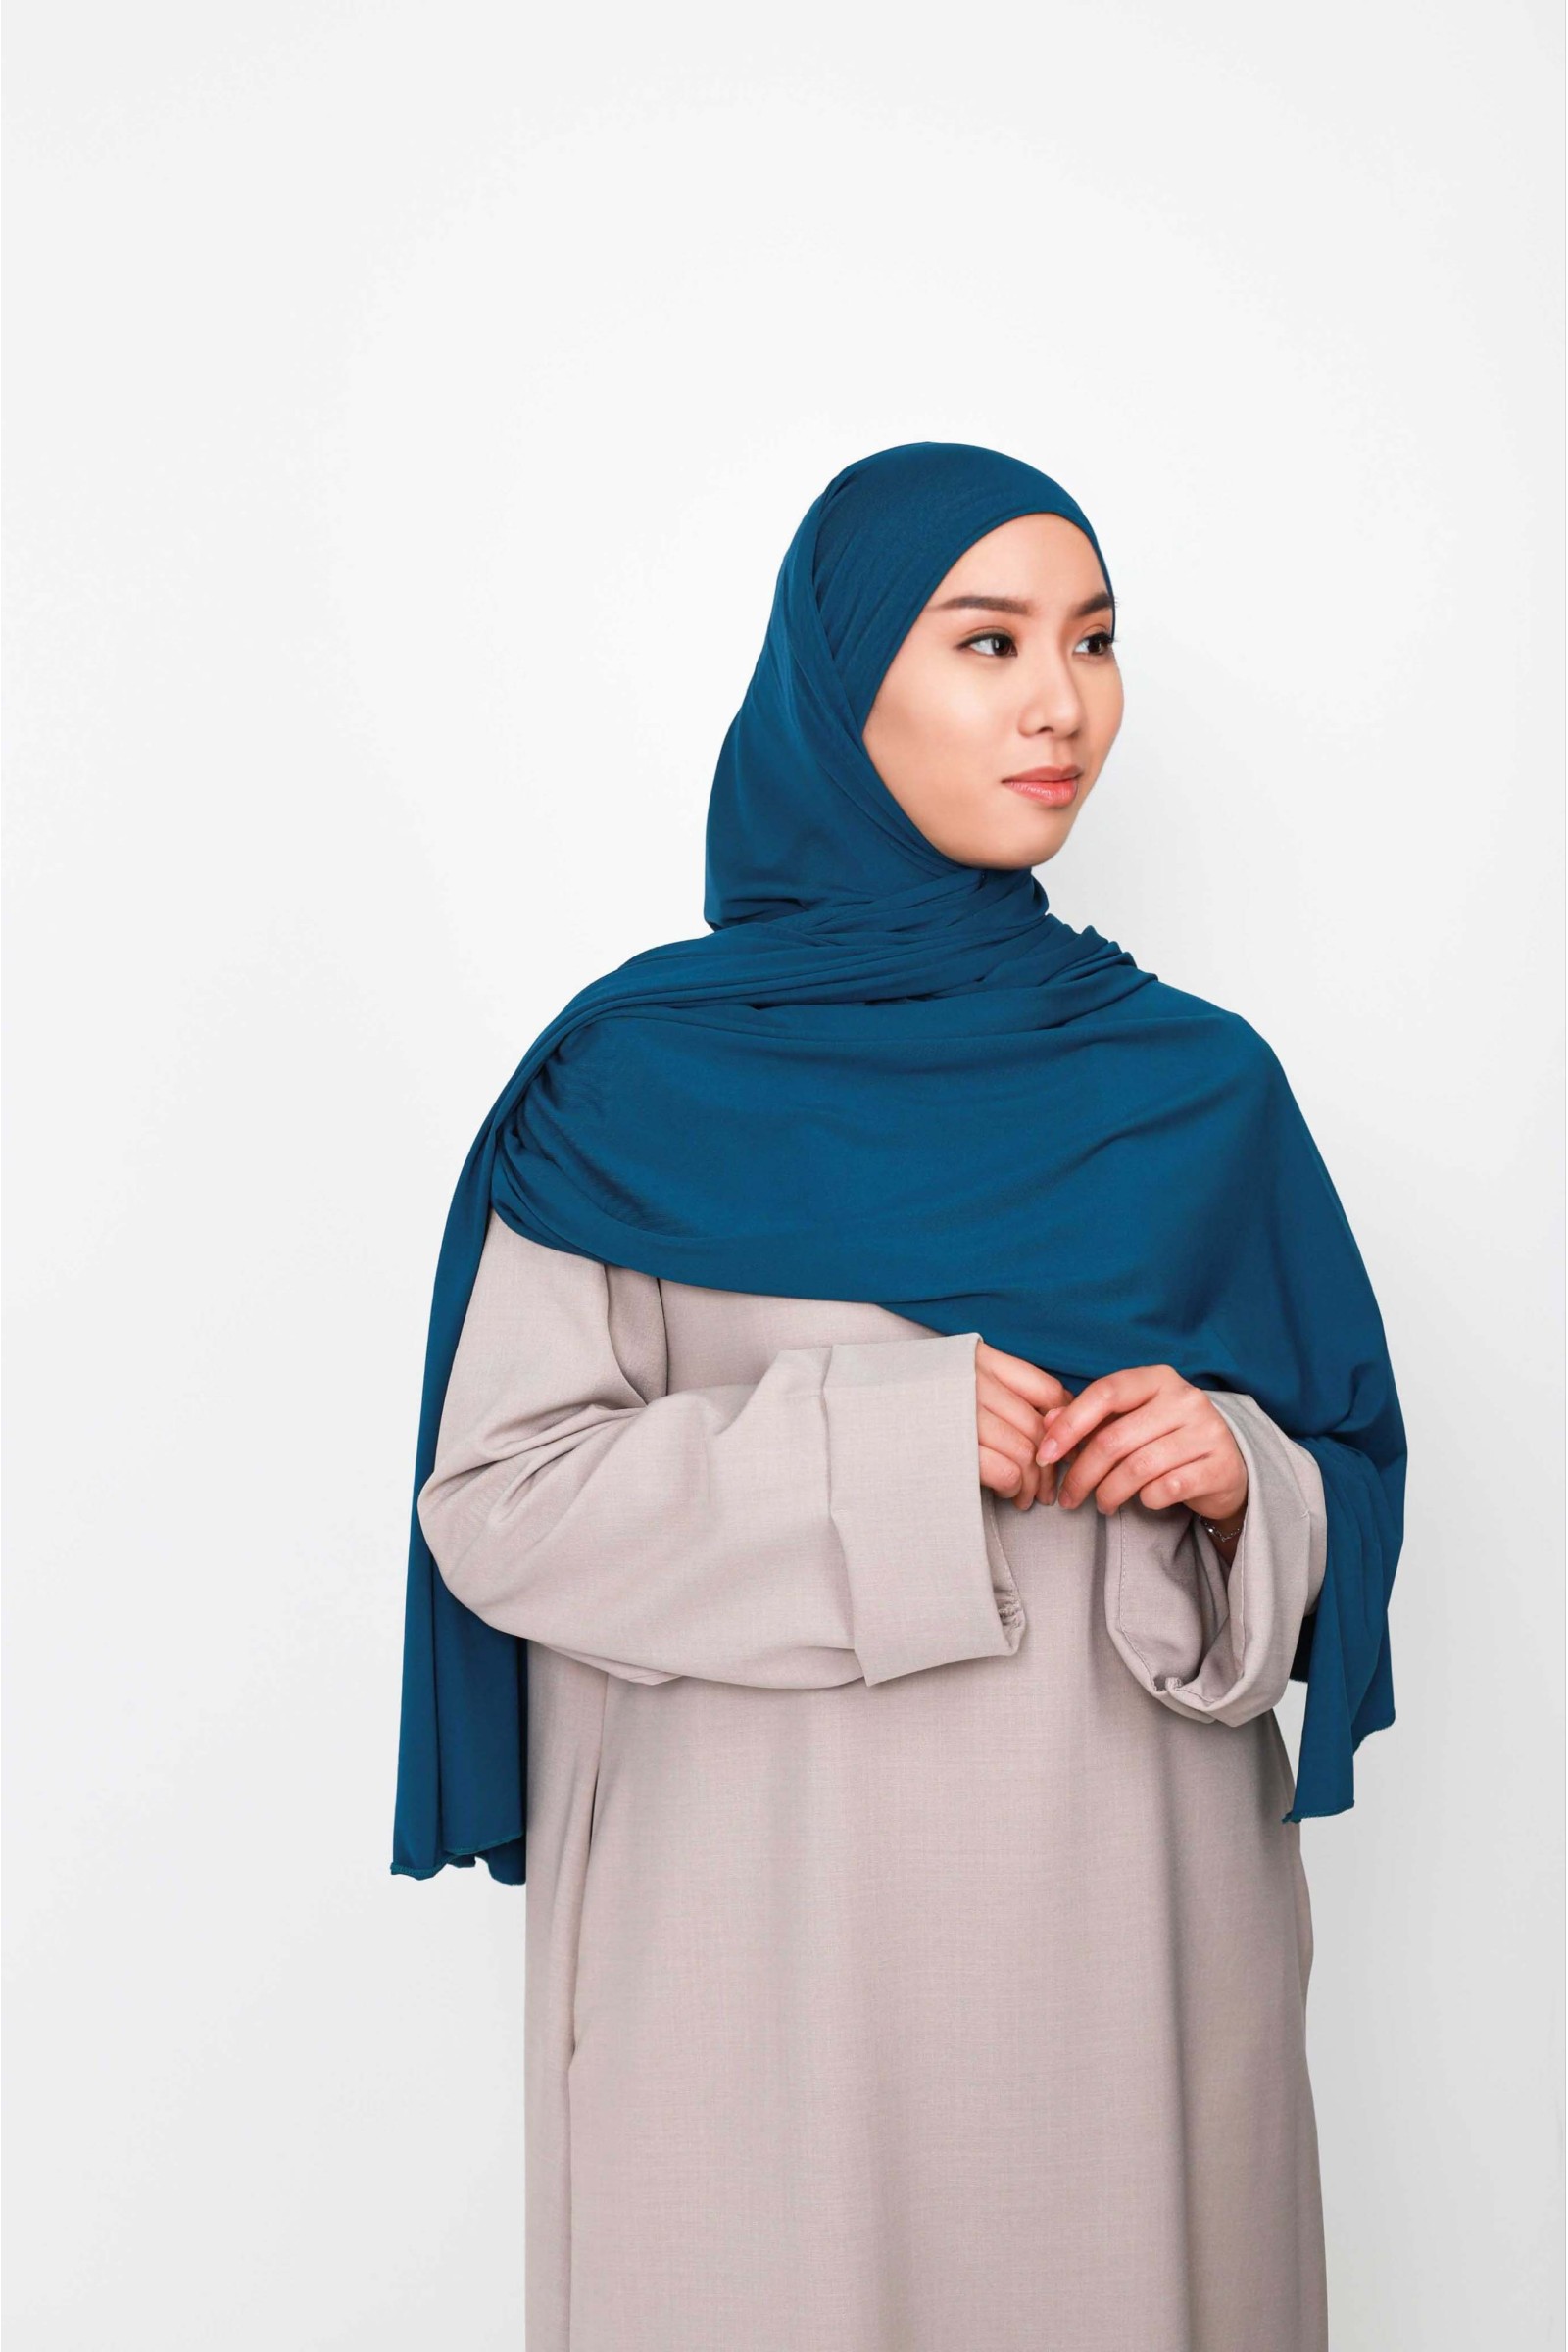 Practical veil to put on with headband ideal for Muslim women